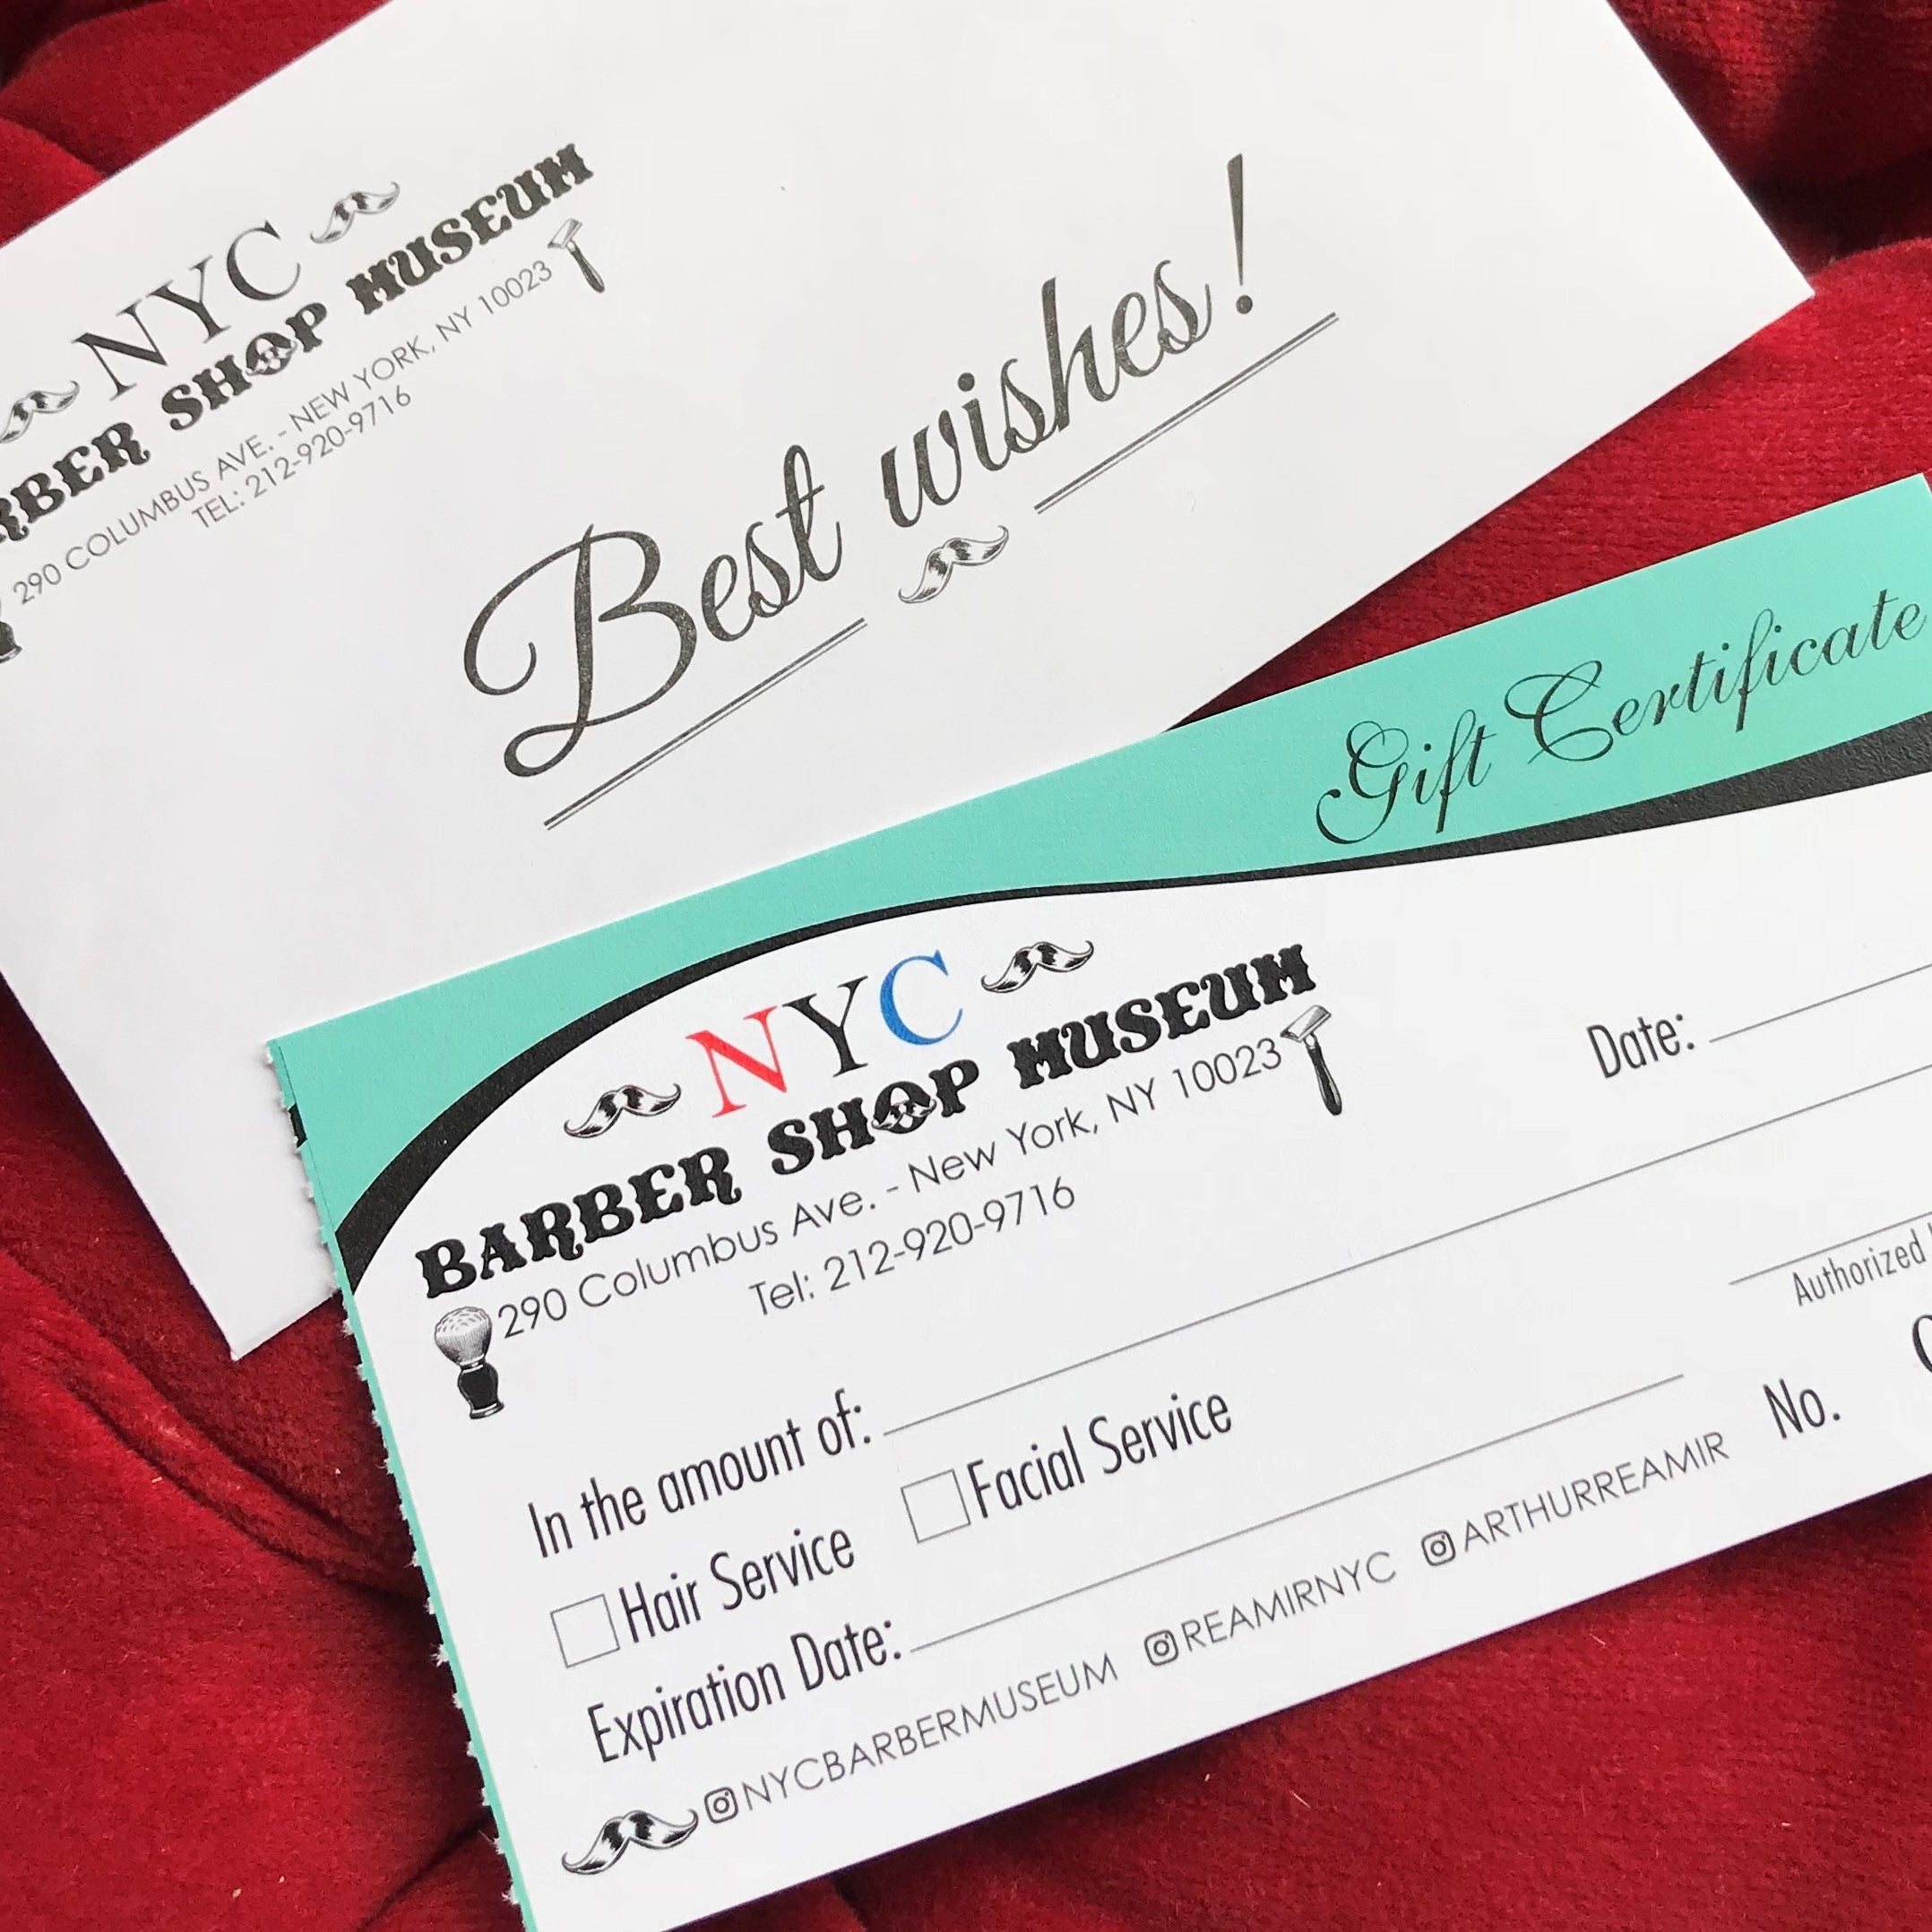 Shave Gift Certificate NYC Barber Shop Museum